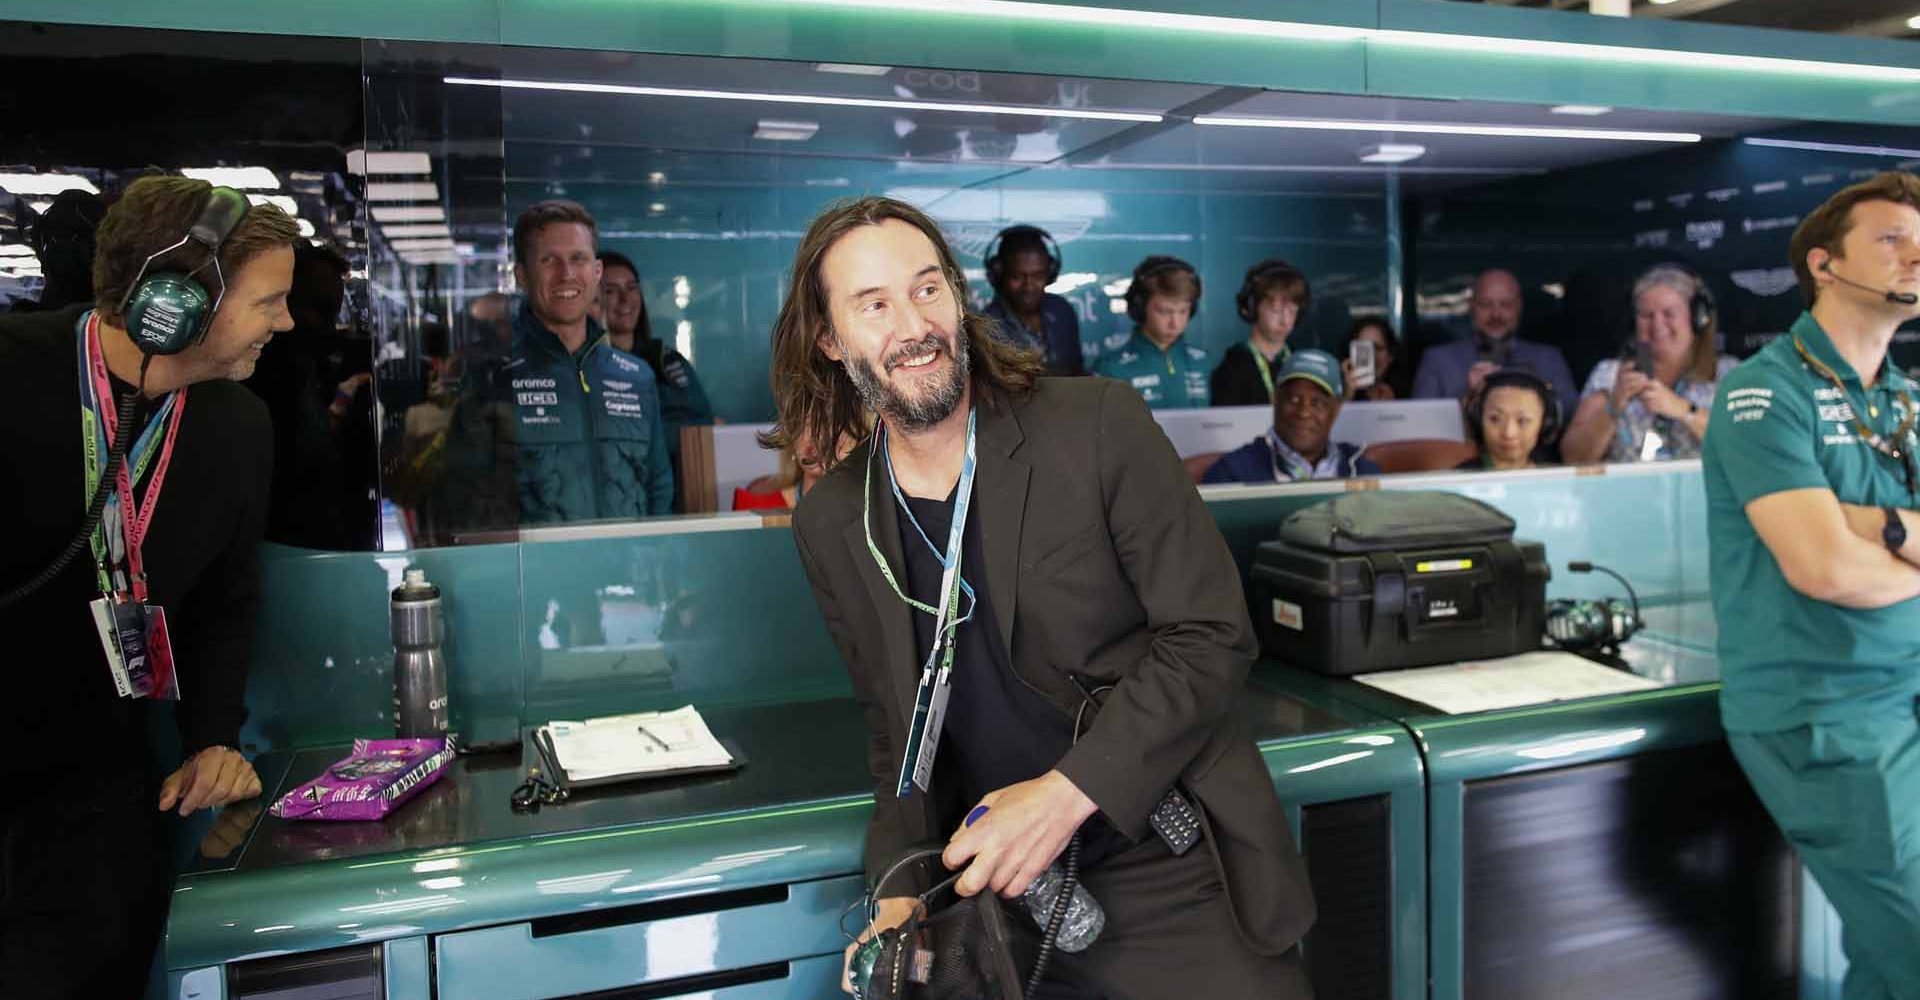 Portrait, VIPs, Silverstone Circuit, GP2210a, F1, GP, Great Britain
Actor Keanu Reeves in the Aston Martin garage